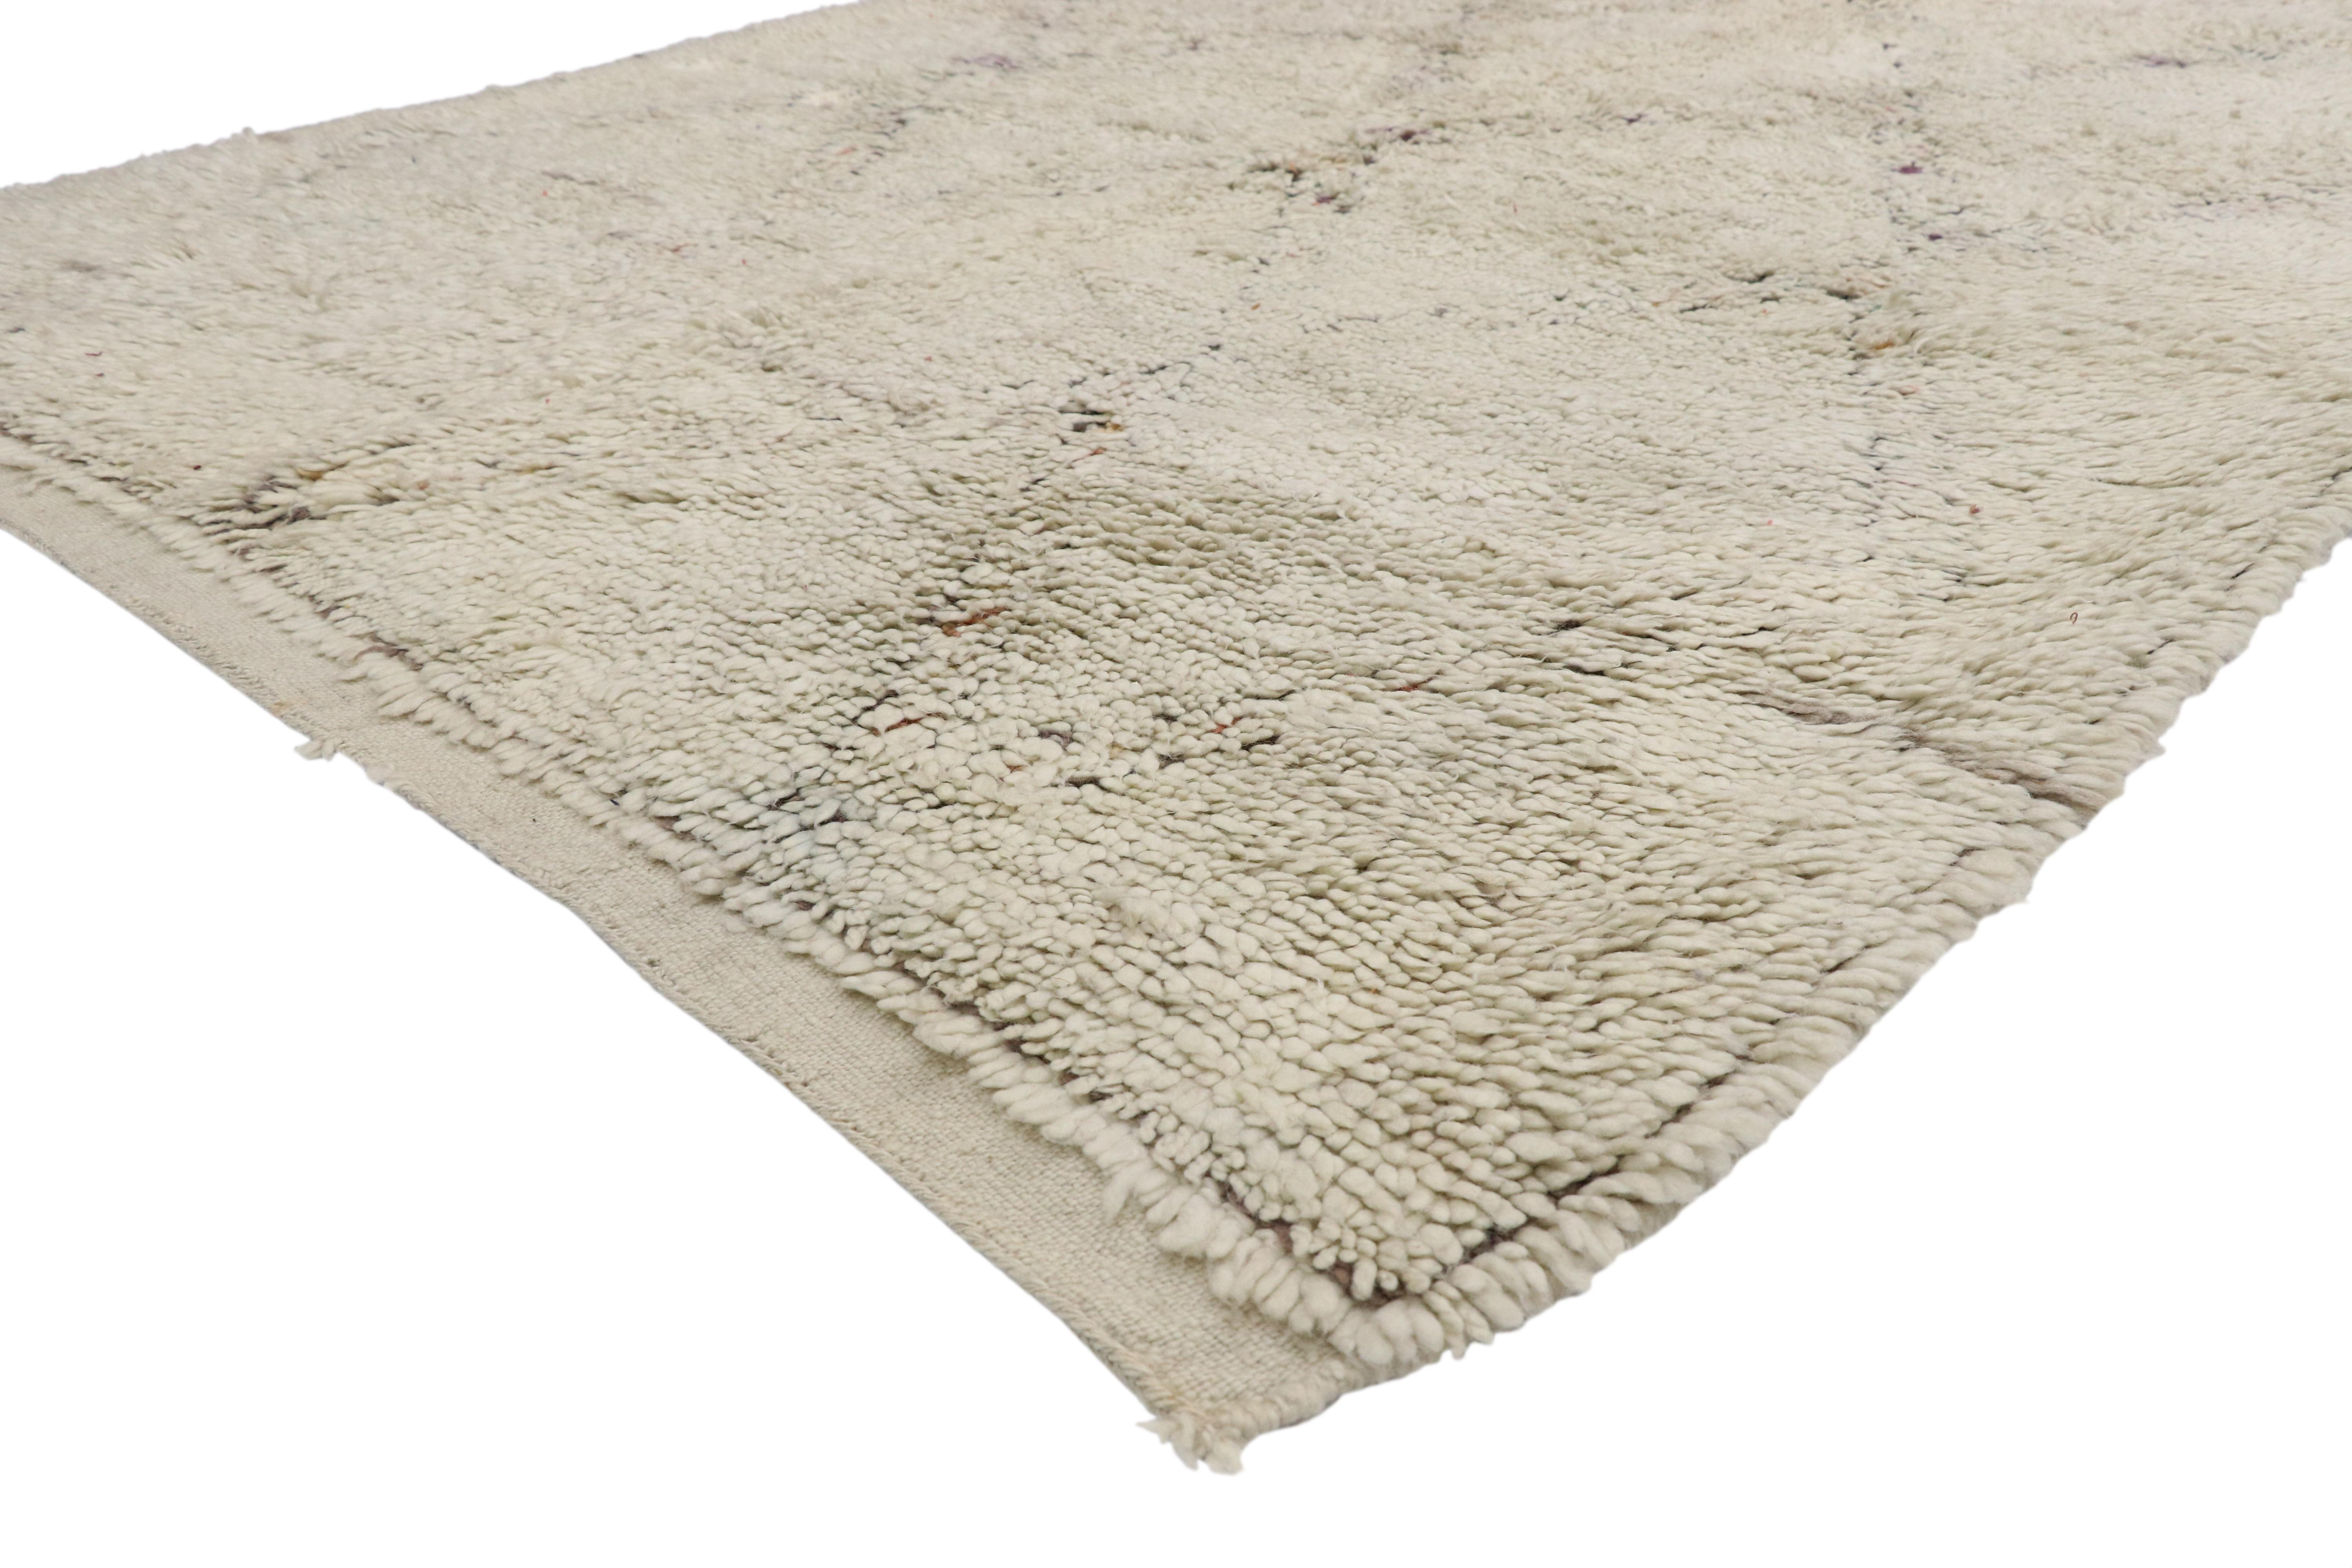 Bauhaus Vintage Berber Moroccan Rug with Hygge Style